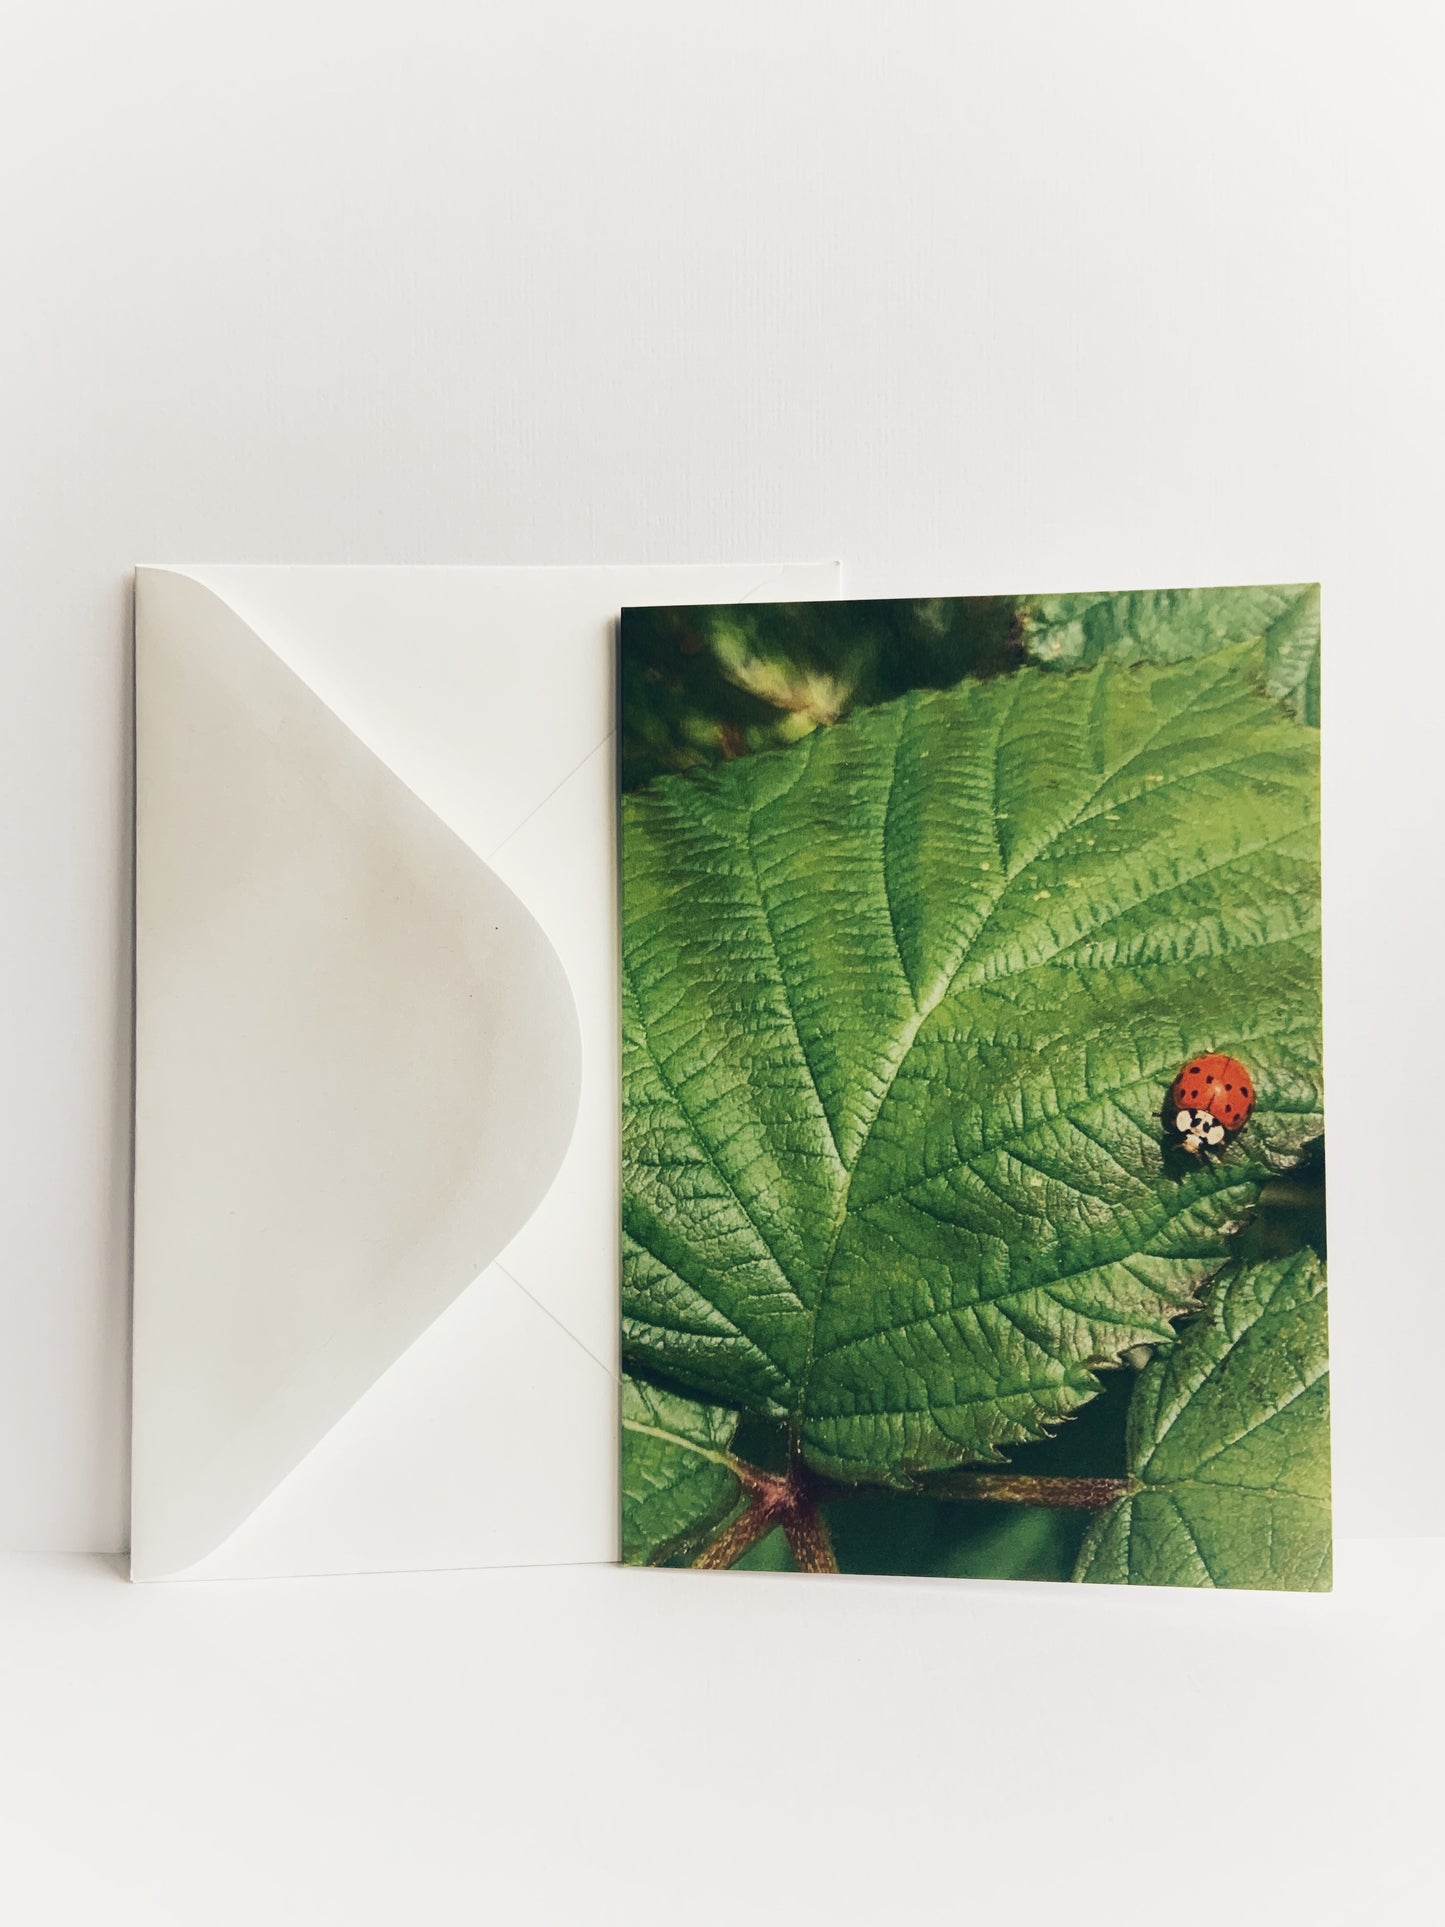 Greeting card with an image of a ladybug on a bright green leaf